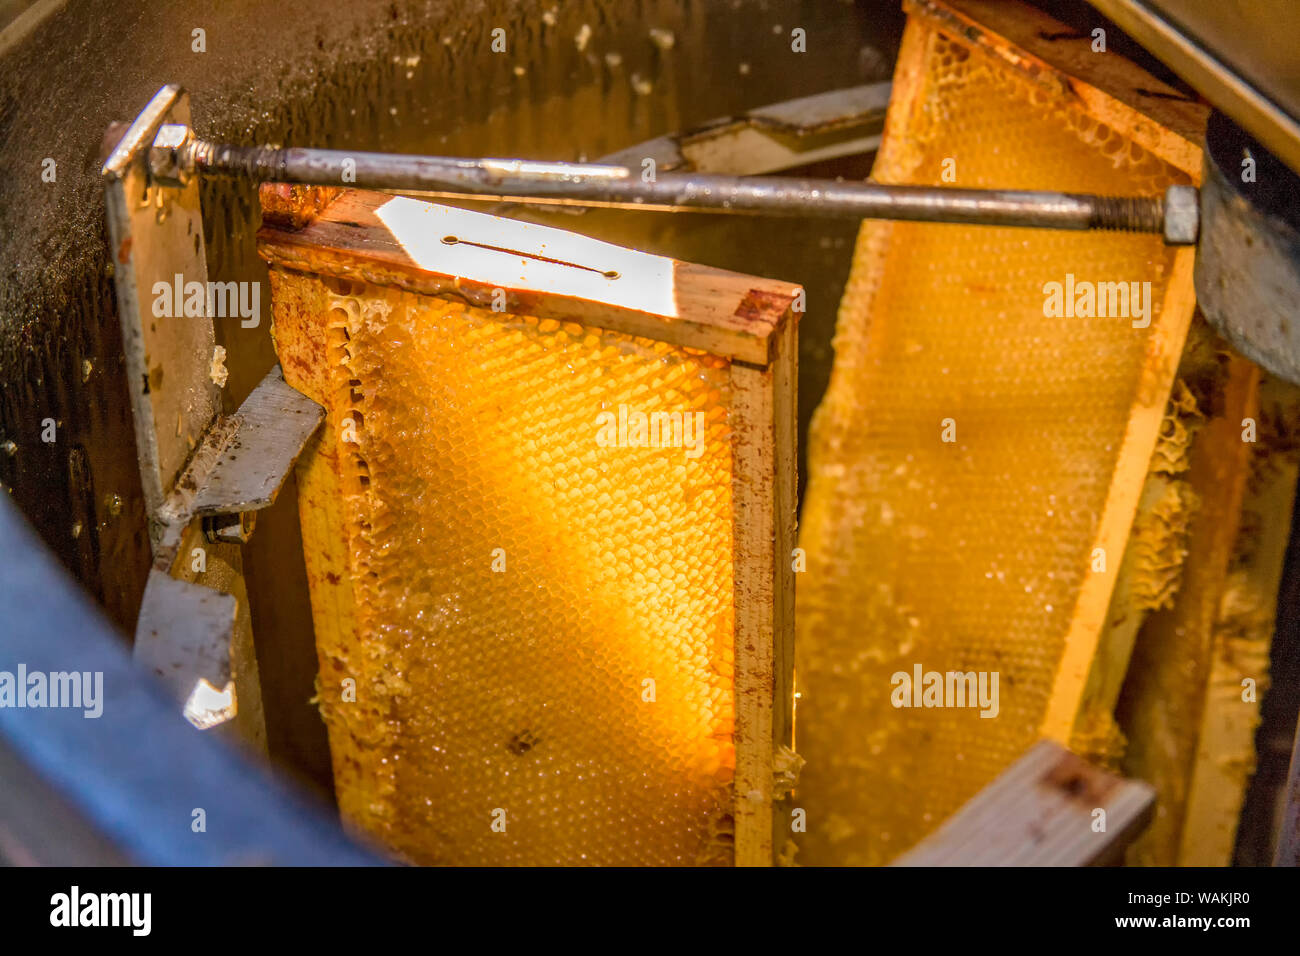 Frames of honey in a honey extractor machine. As the frames of honey spin, centrifugal force throws the honey against the side walls of the extractor where it will run down and collect at the bottom of the extractor. Stock Photo